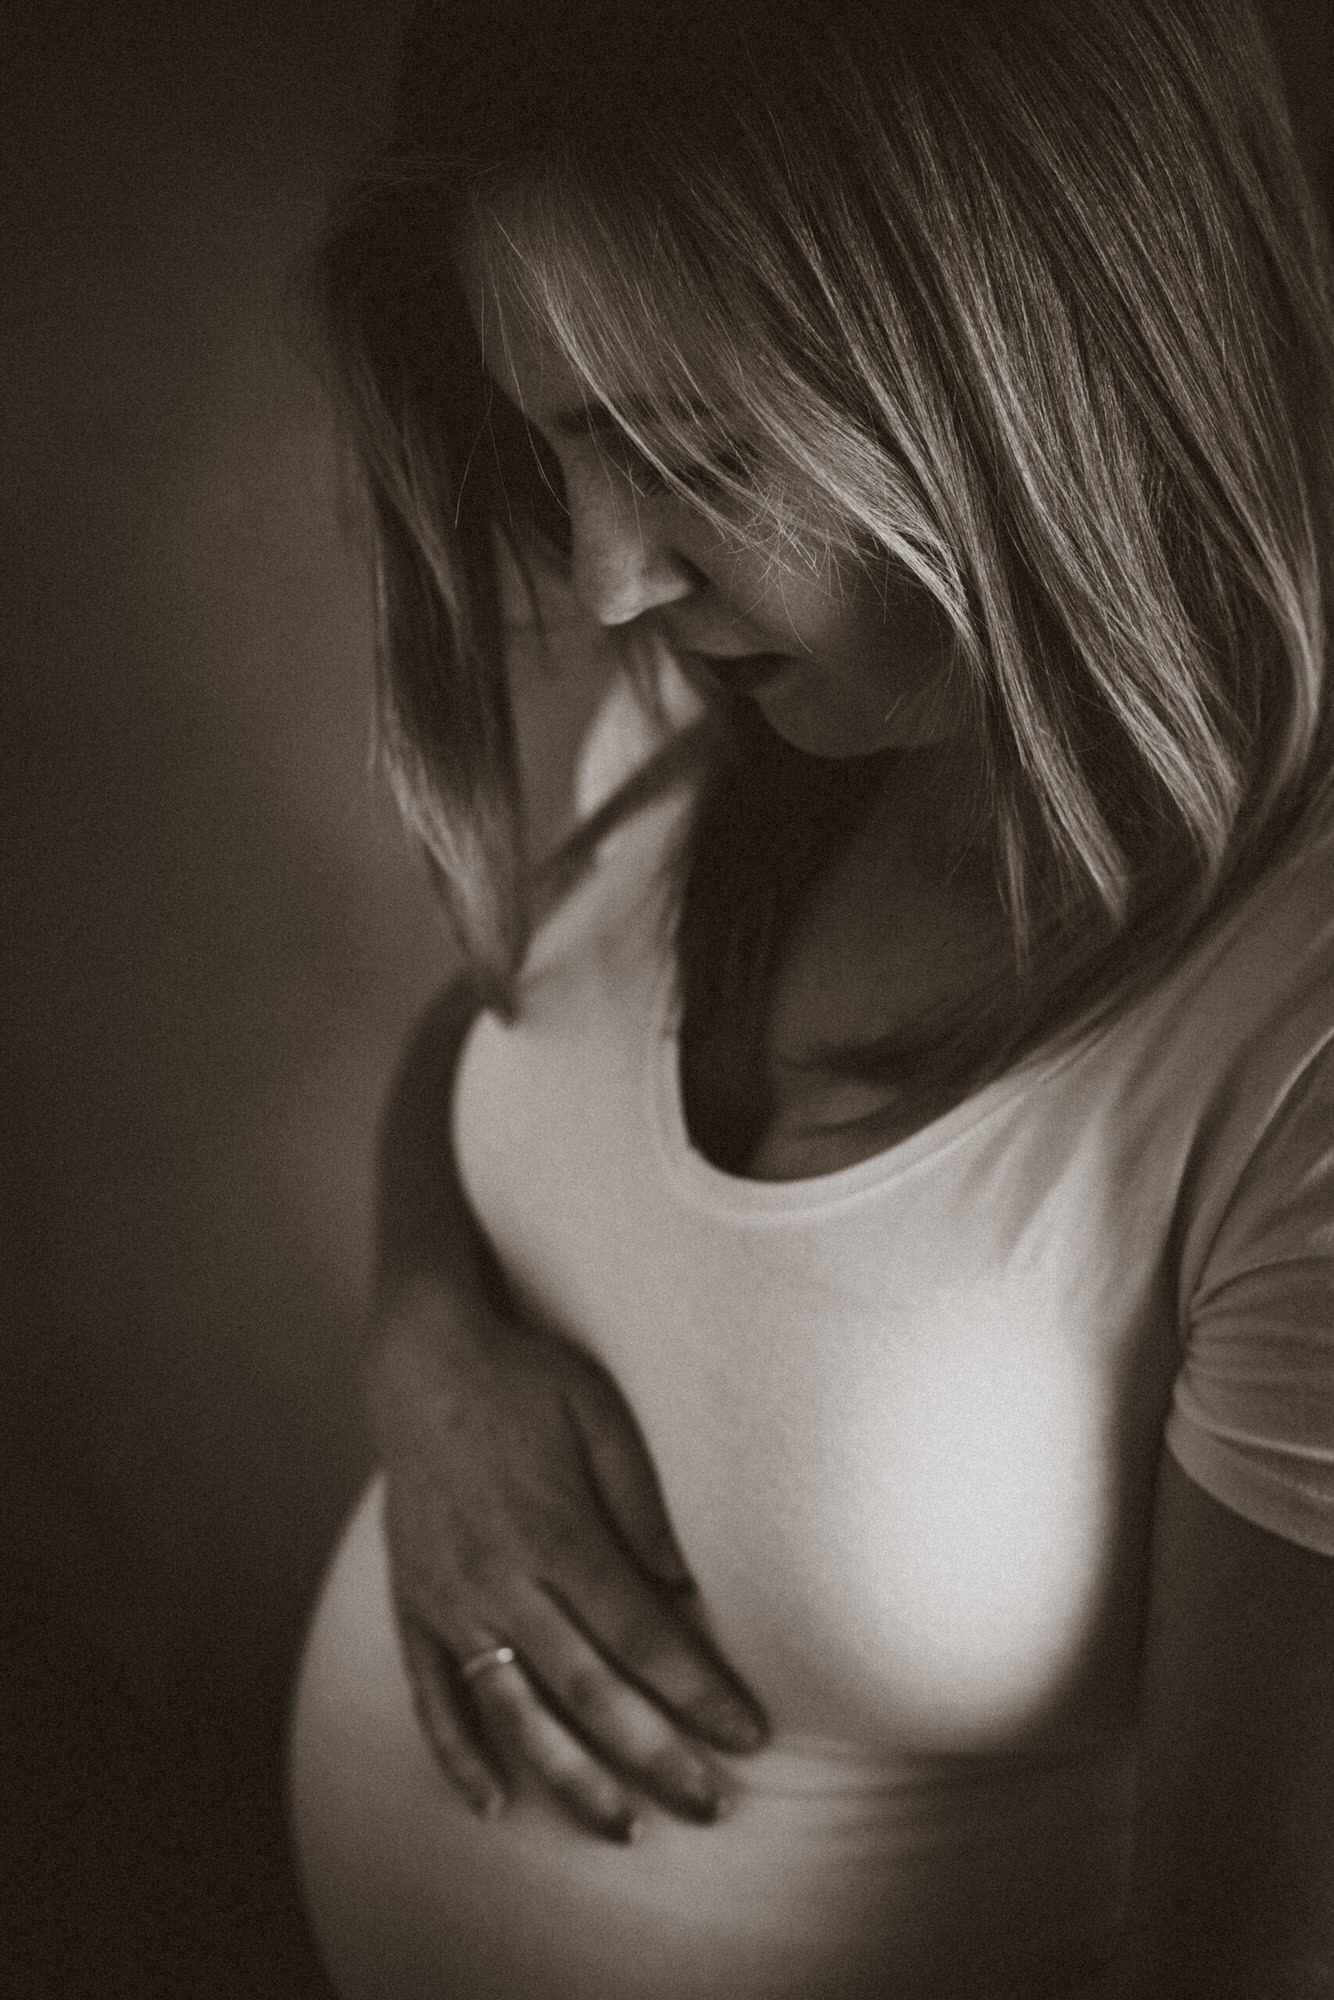 Maternity photography session